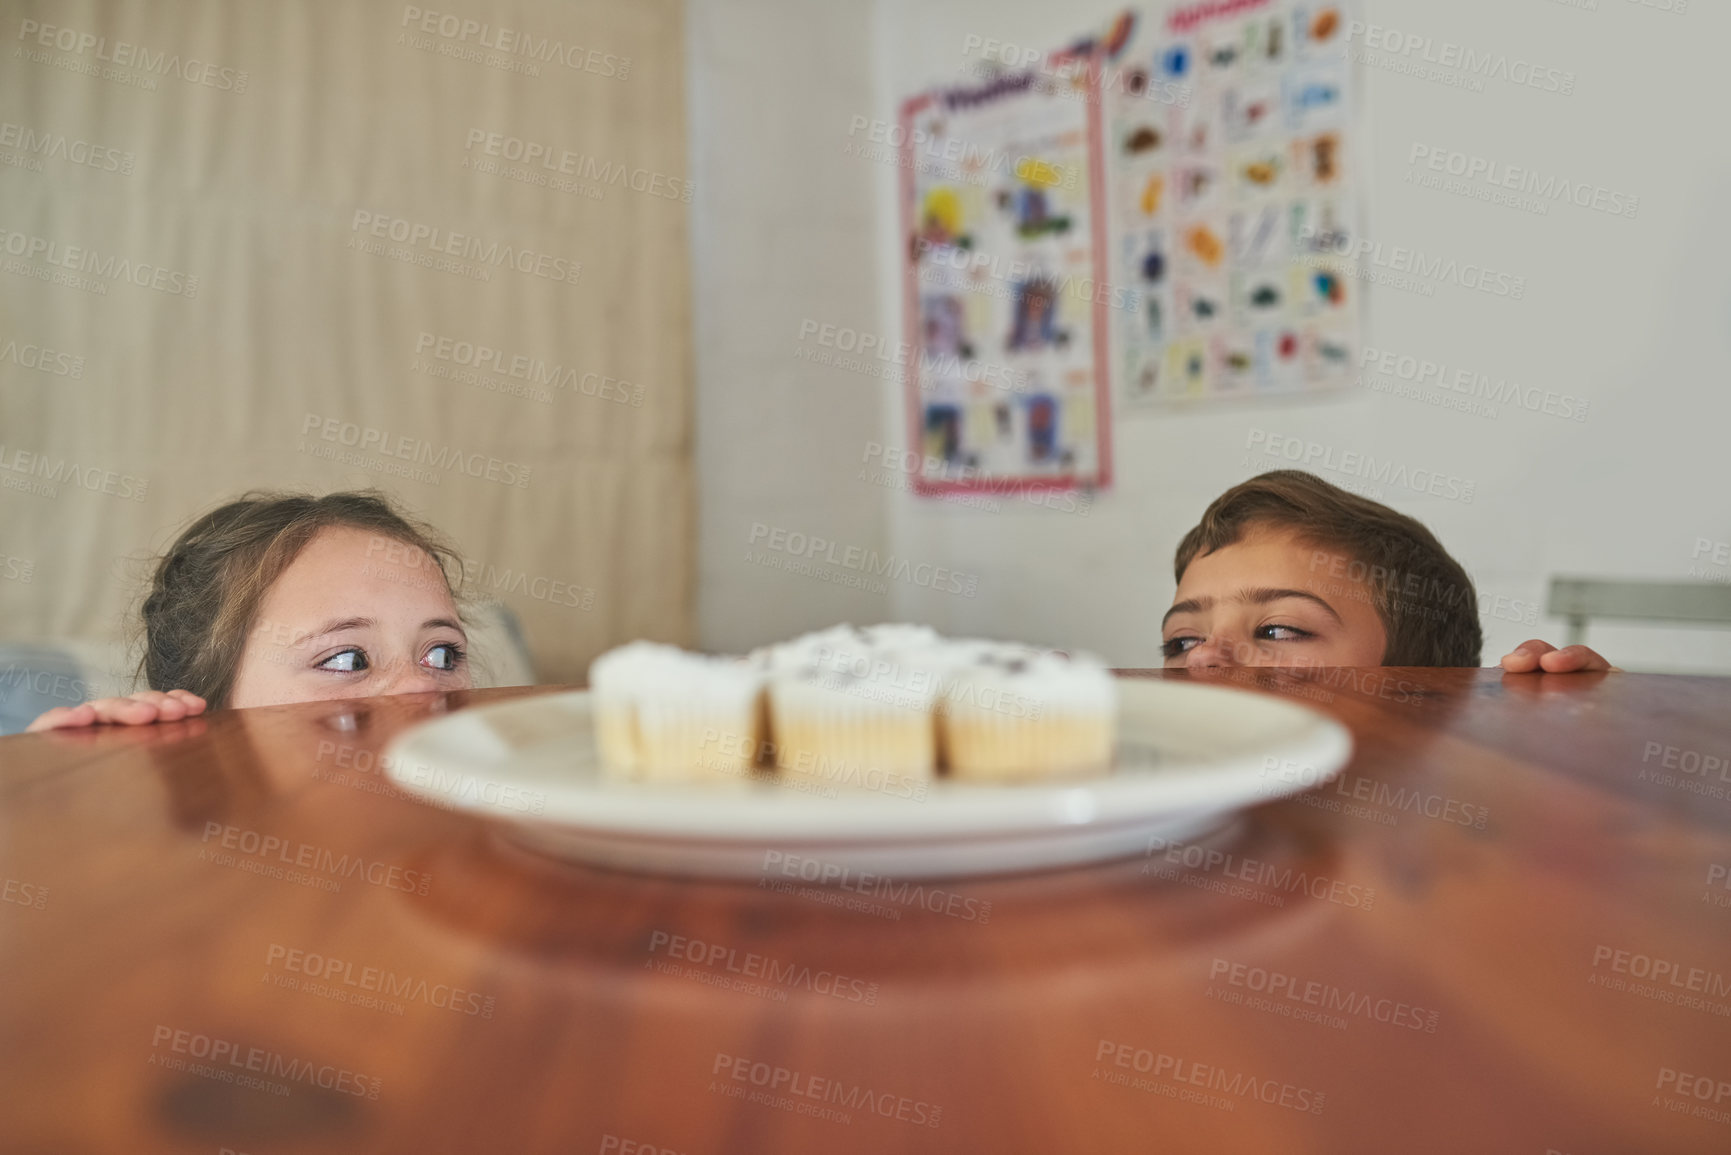 Buy stock photo Cropped shot of two naughty children eyeing a plate of cupcakes